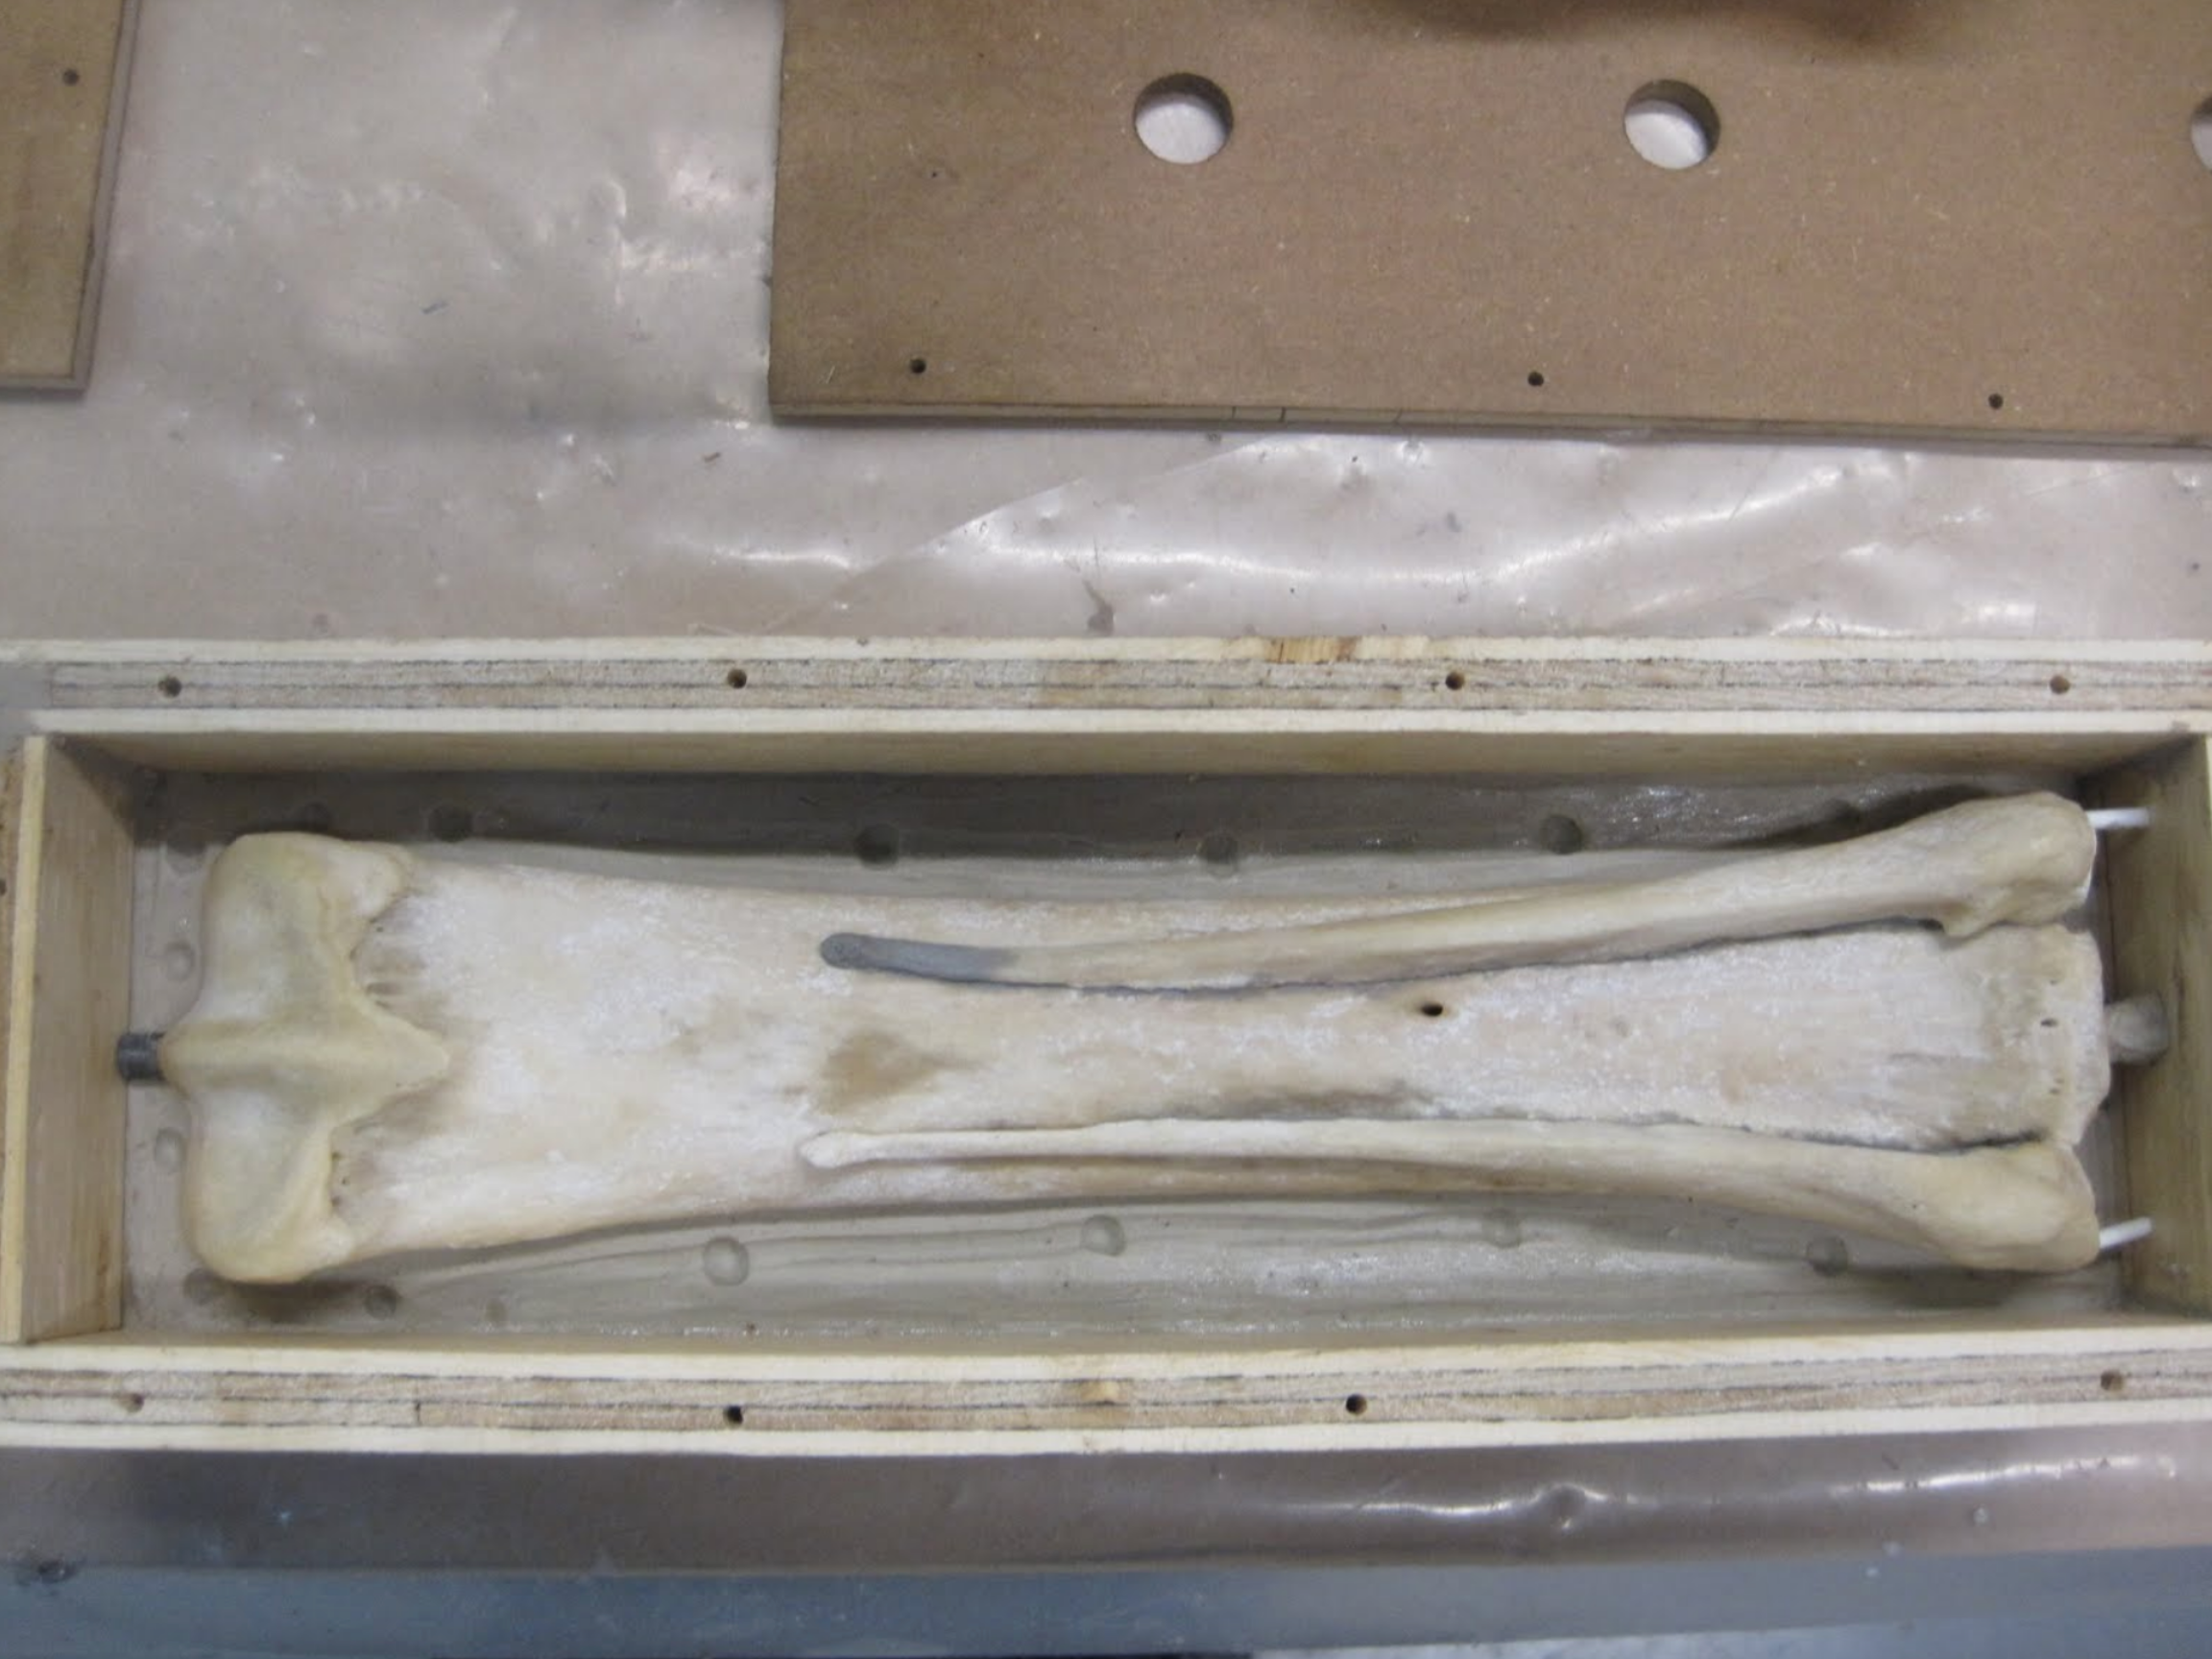  Here we see the equine leg bones ( cannon and splint ) with the clay dam and mold box. Silicone will now be poured into the box to create the mold. All the bones of the lower foreleg will be reproduced this way. Once all are cast in a hard urethane 